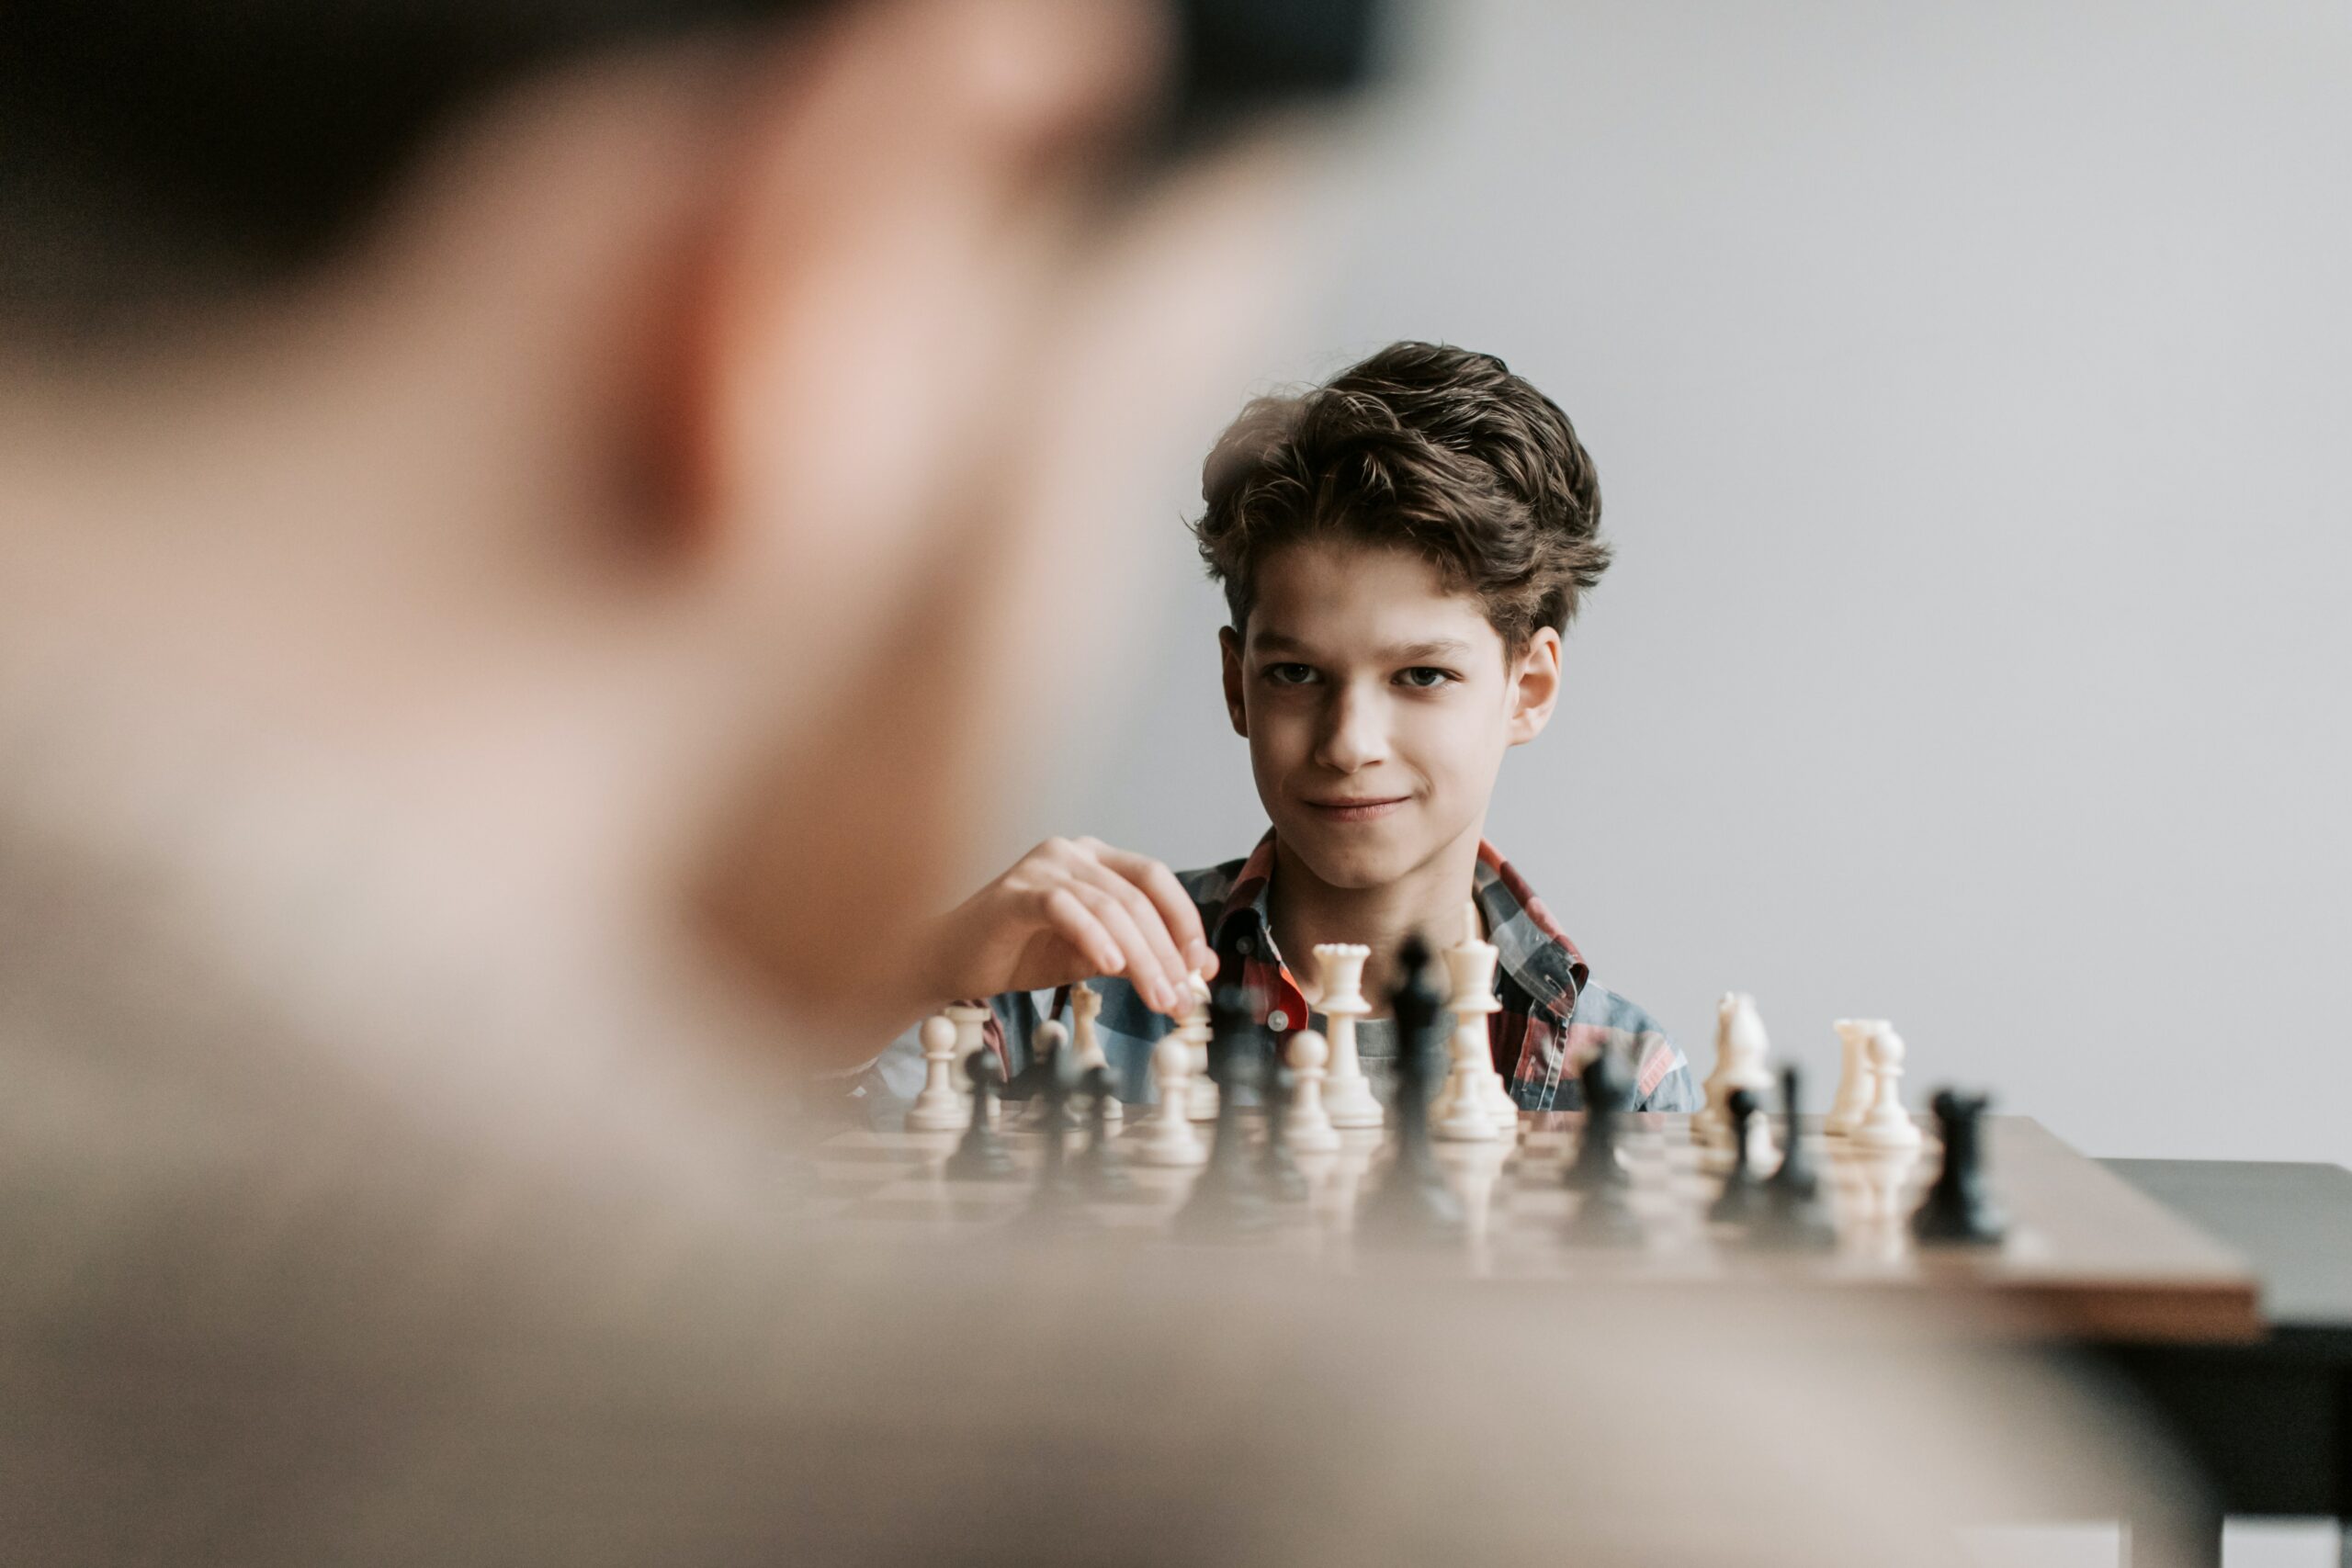 chess opening repertoire to different opponents